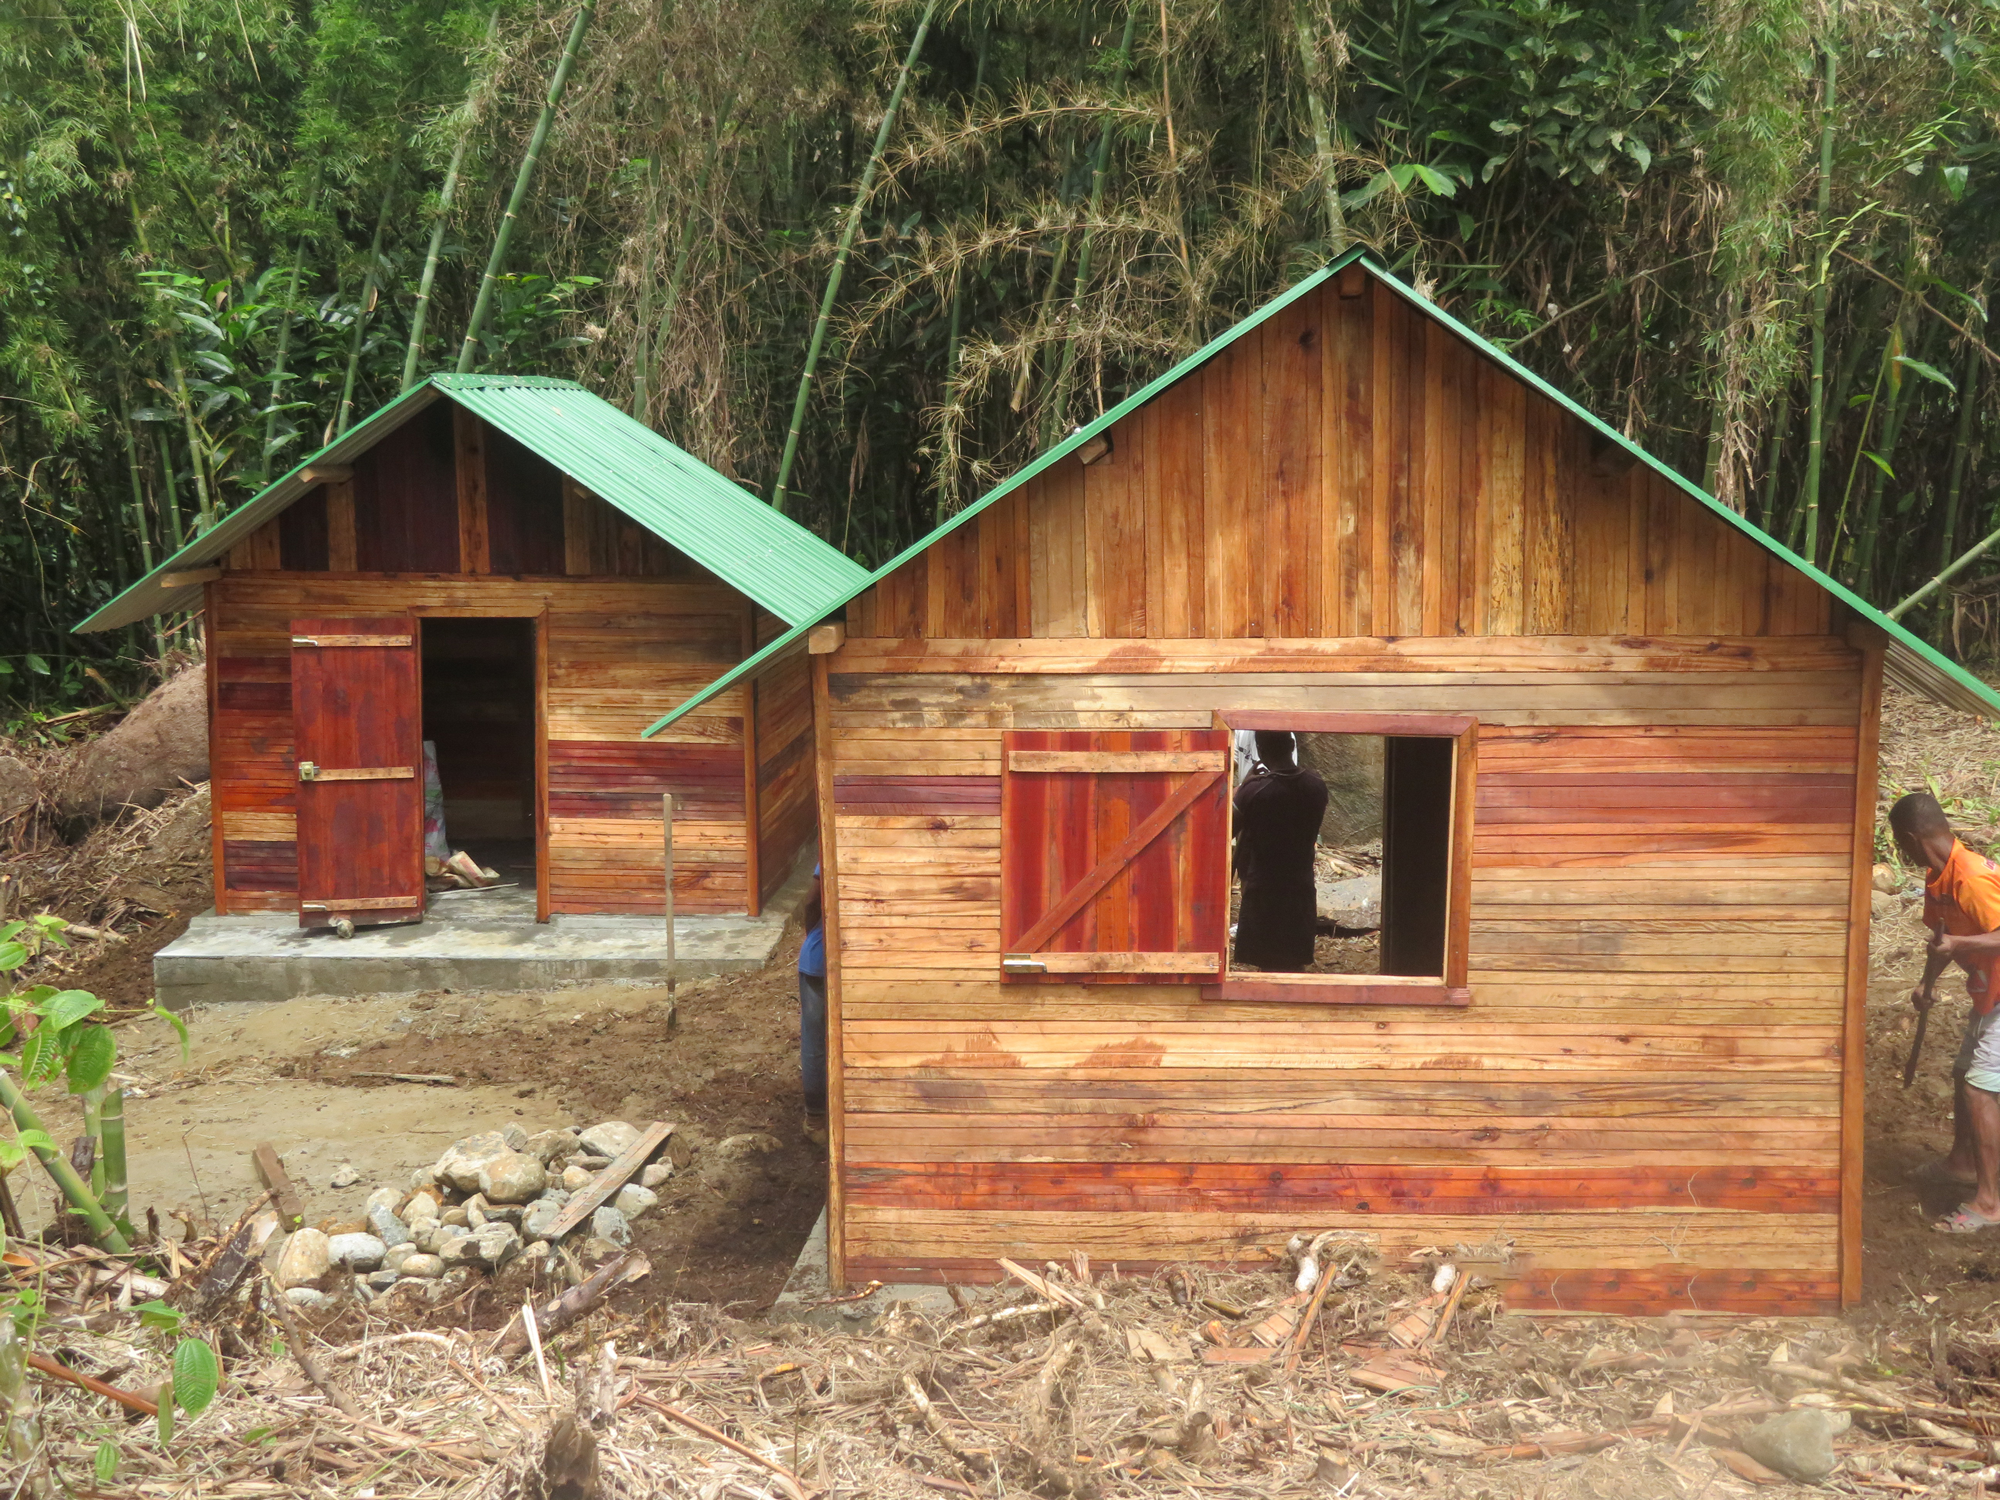 Small wooden bungalows for tourists in Marojejy National Park, Madagascar